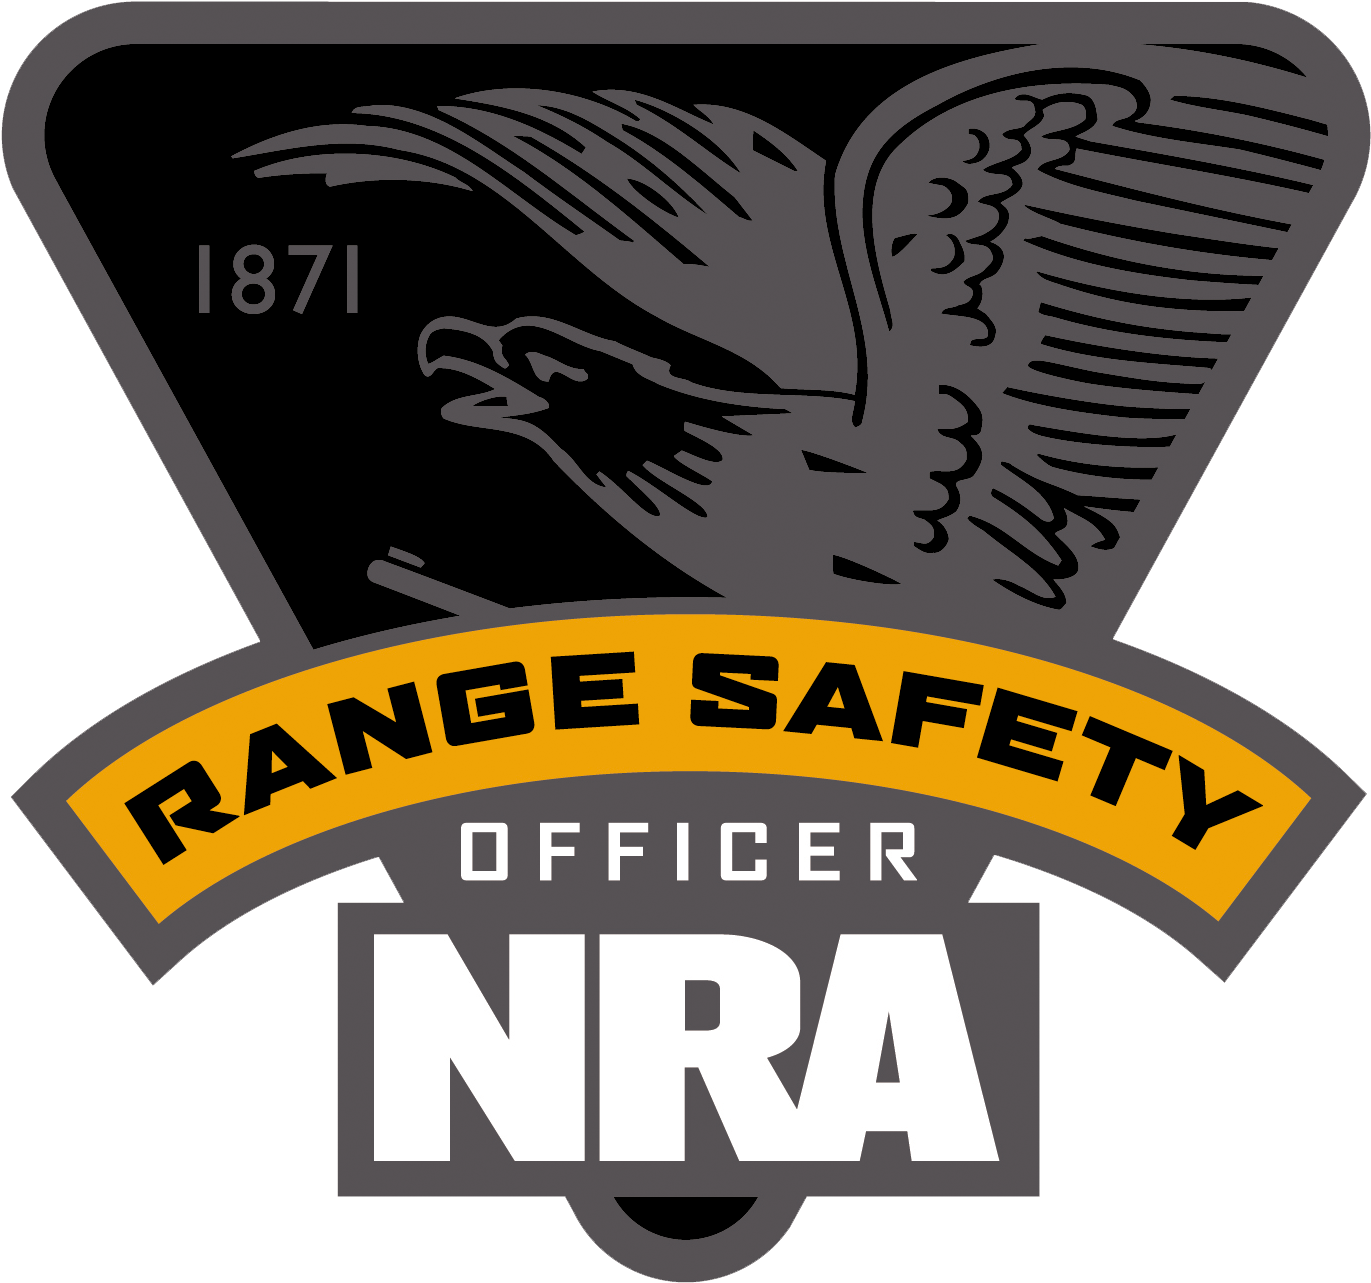 Nra-rso1 - Nra Instructor (1500x1500), Png Download